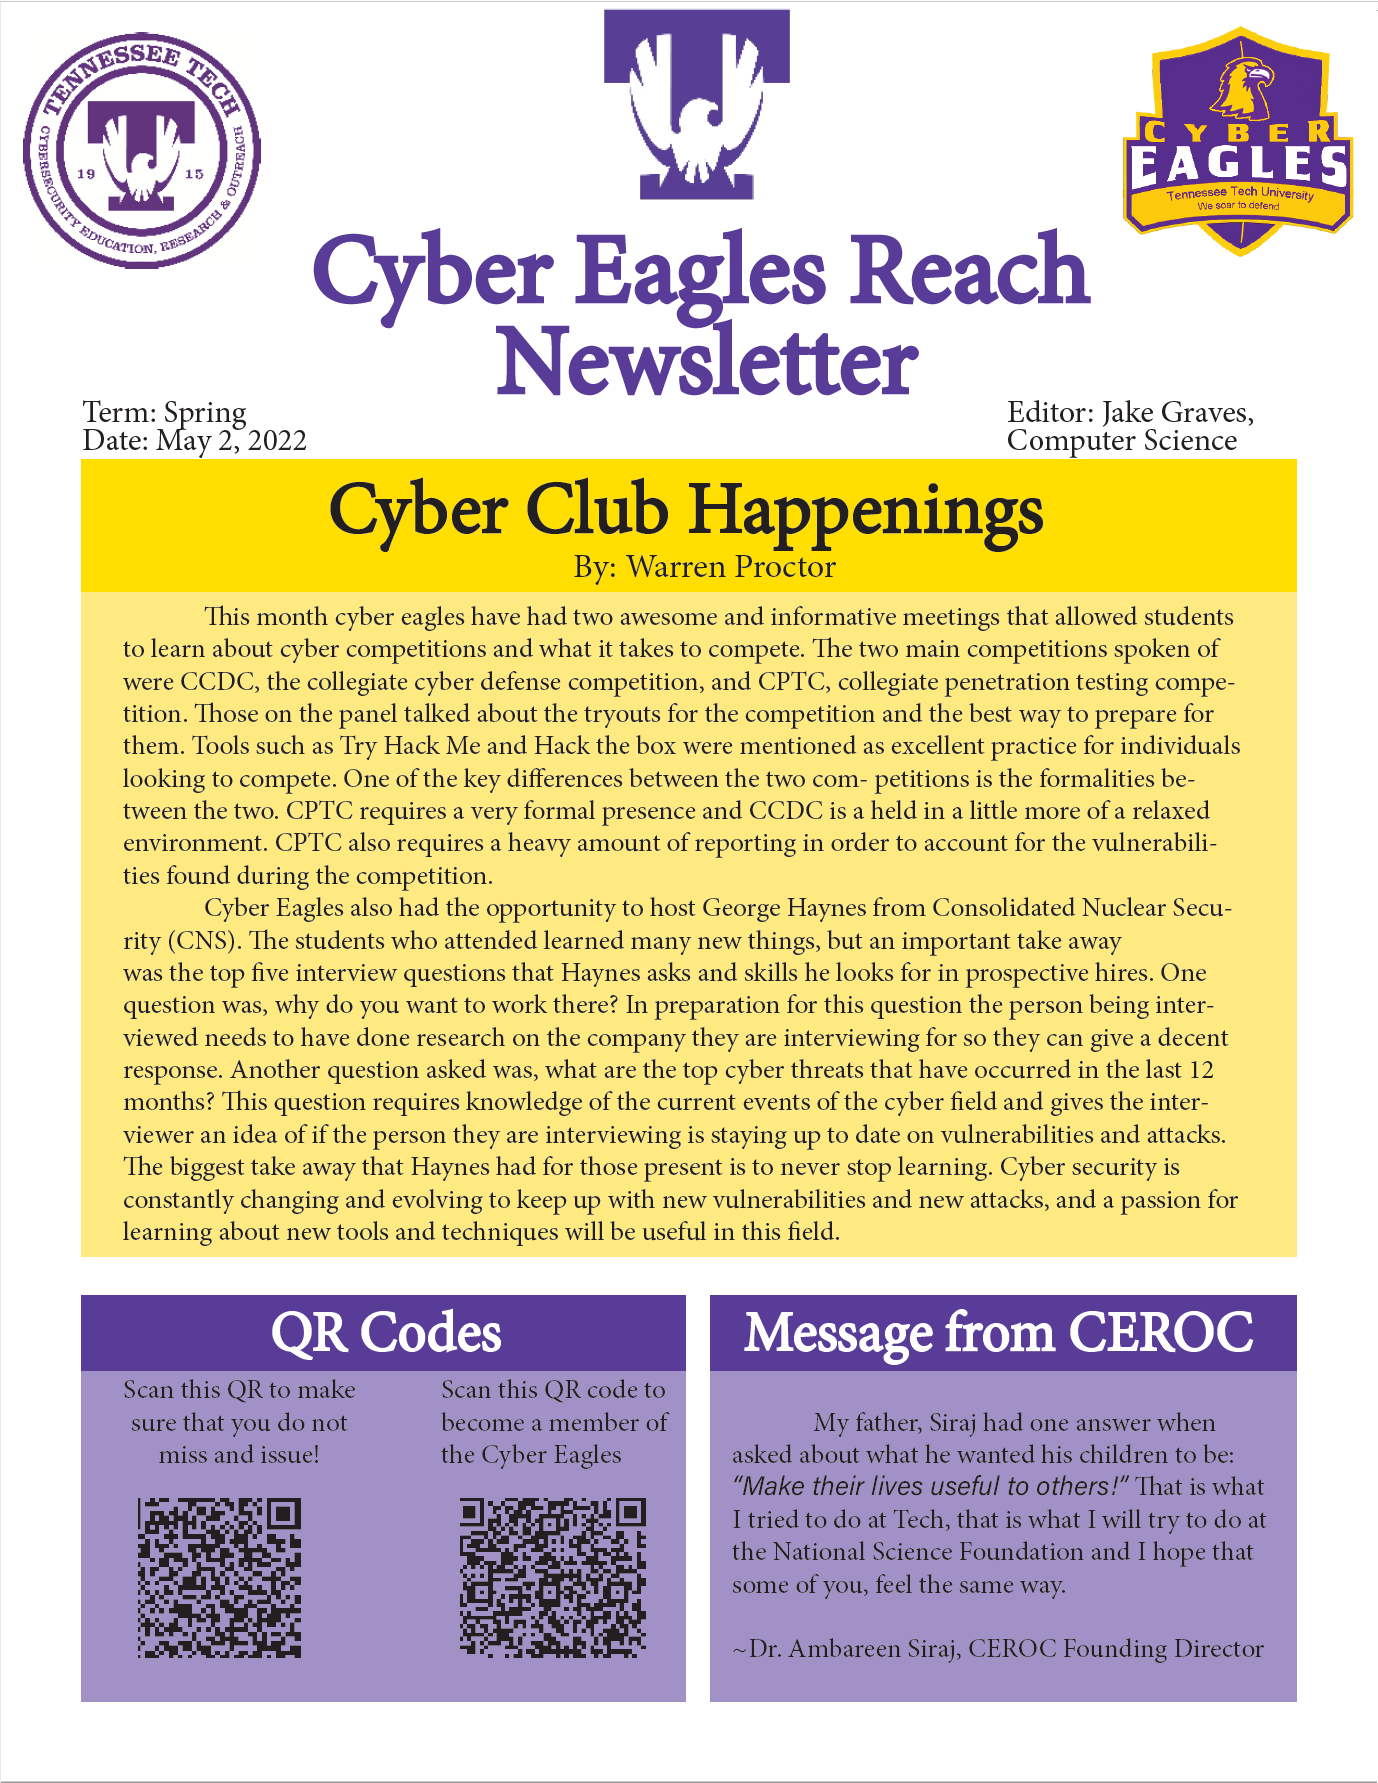 Cyber Eagles Reach Newsletter - April 2022